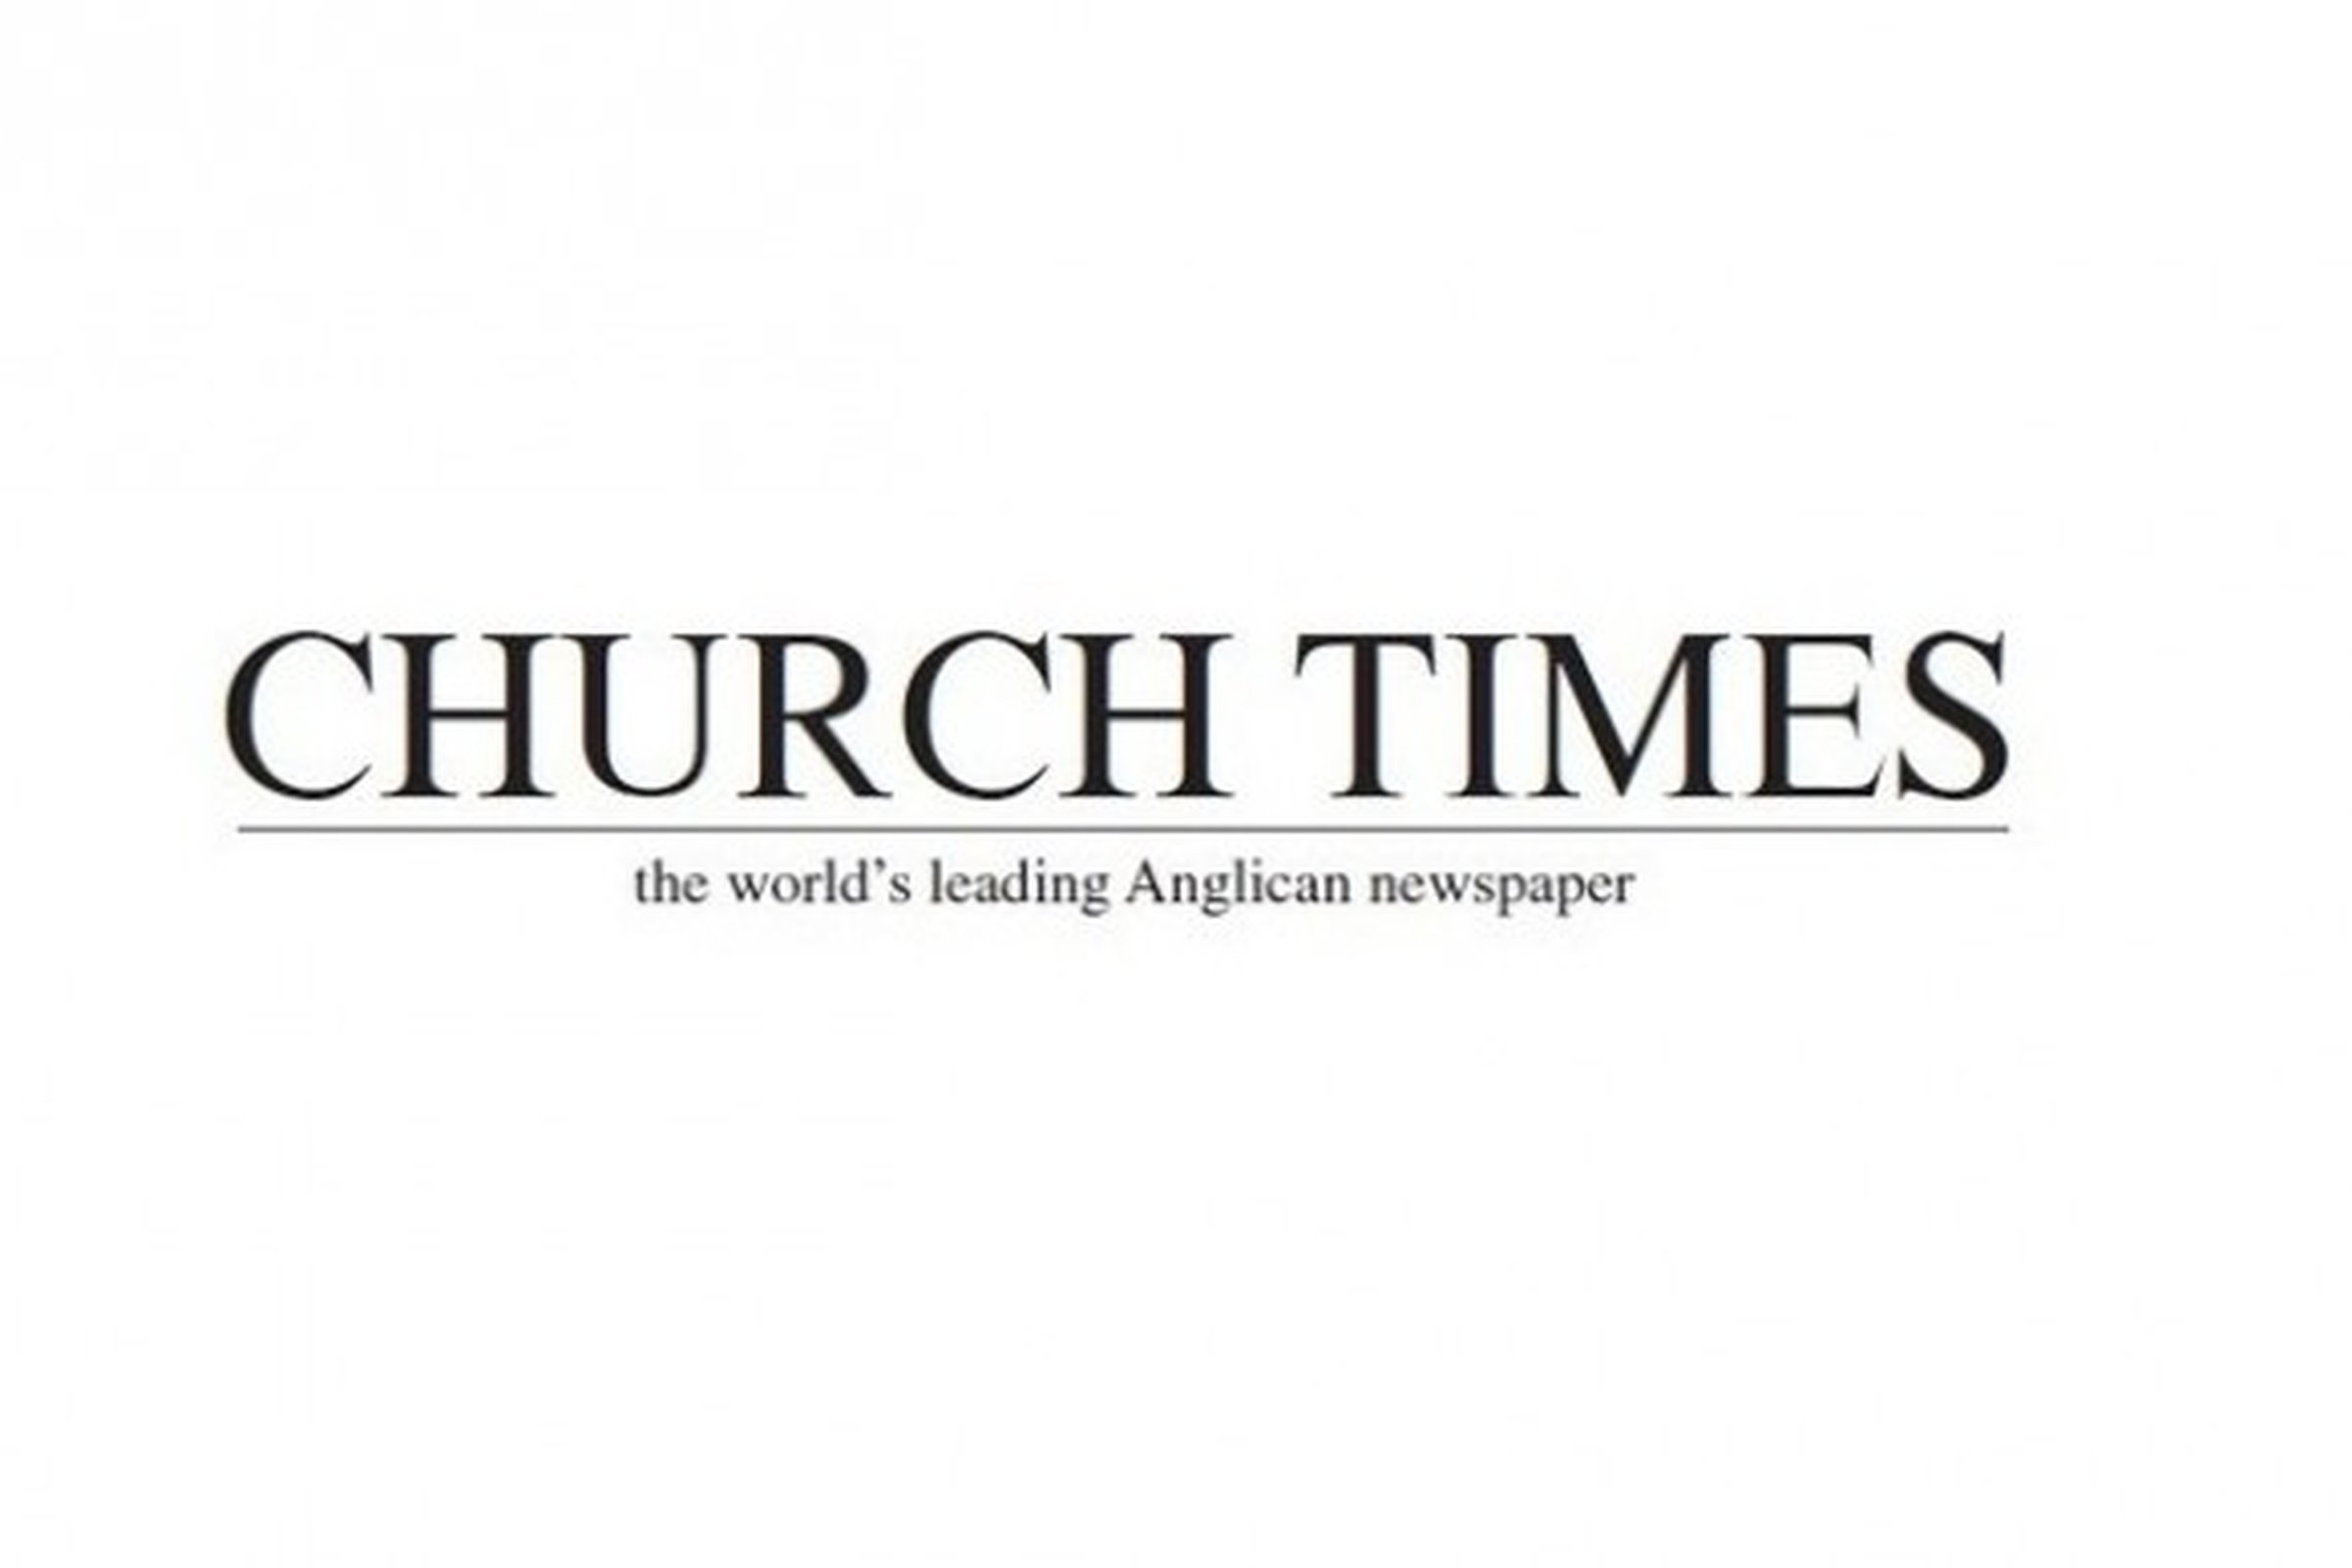 Elizabeth Oldfield for Church Times: Listen hard for the sacred story